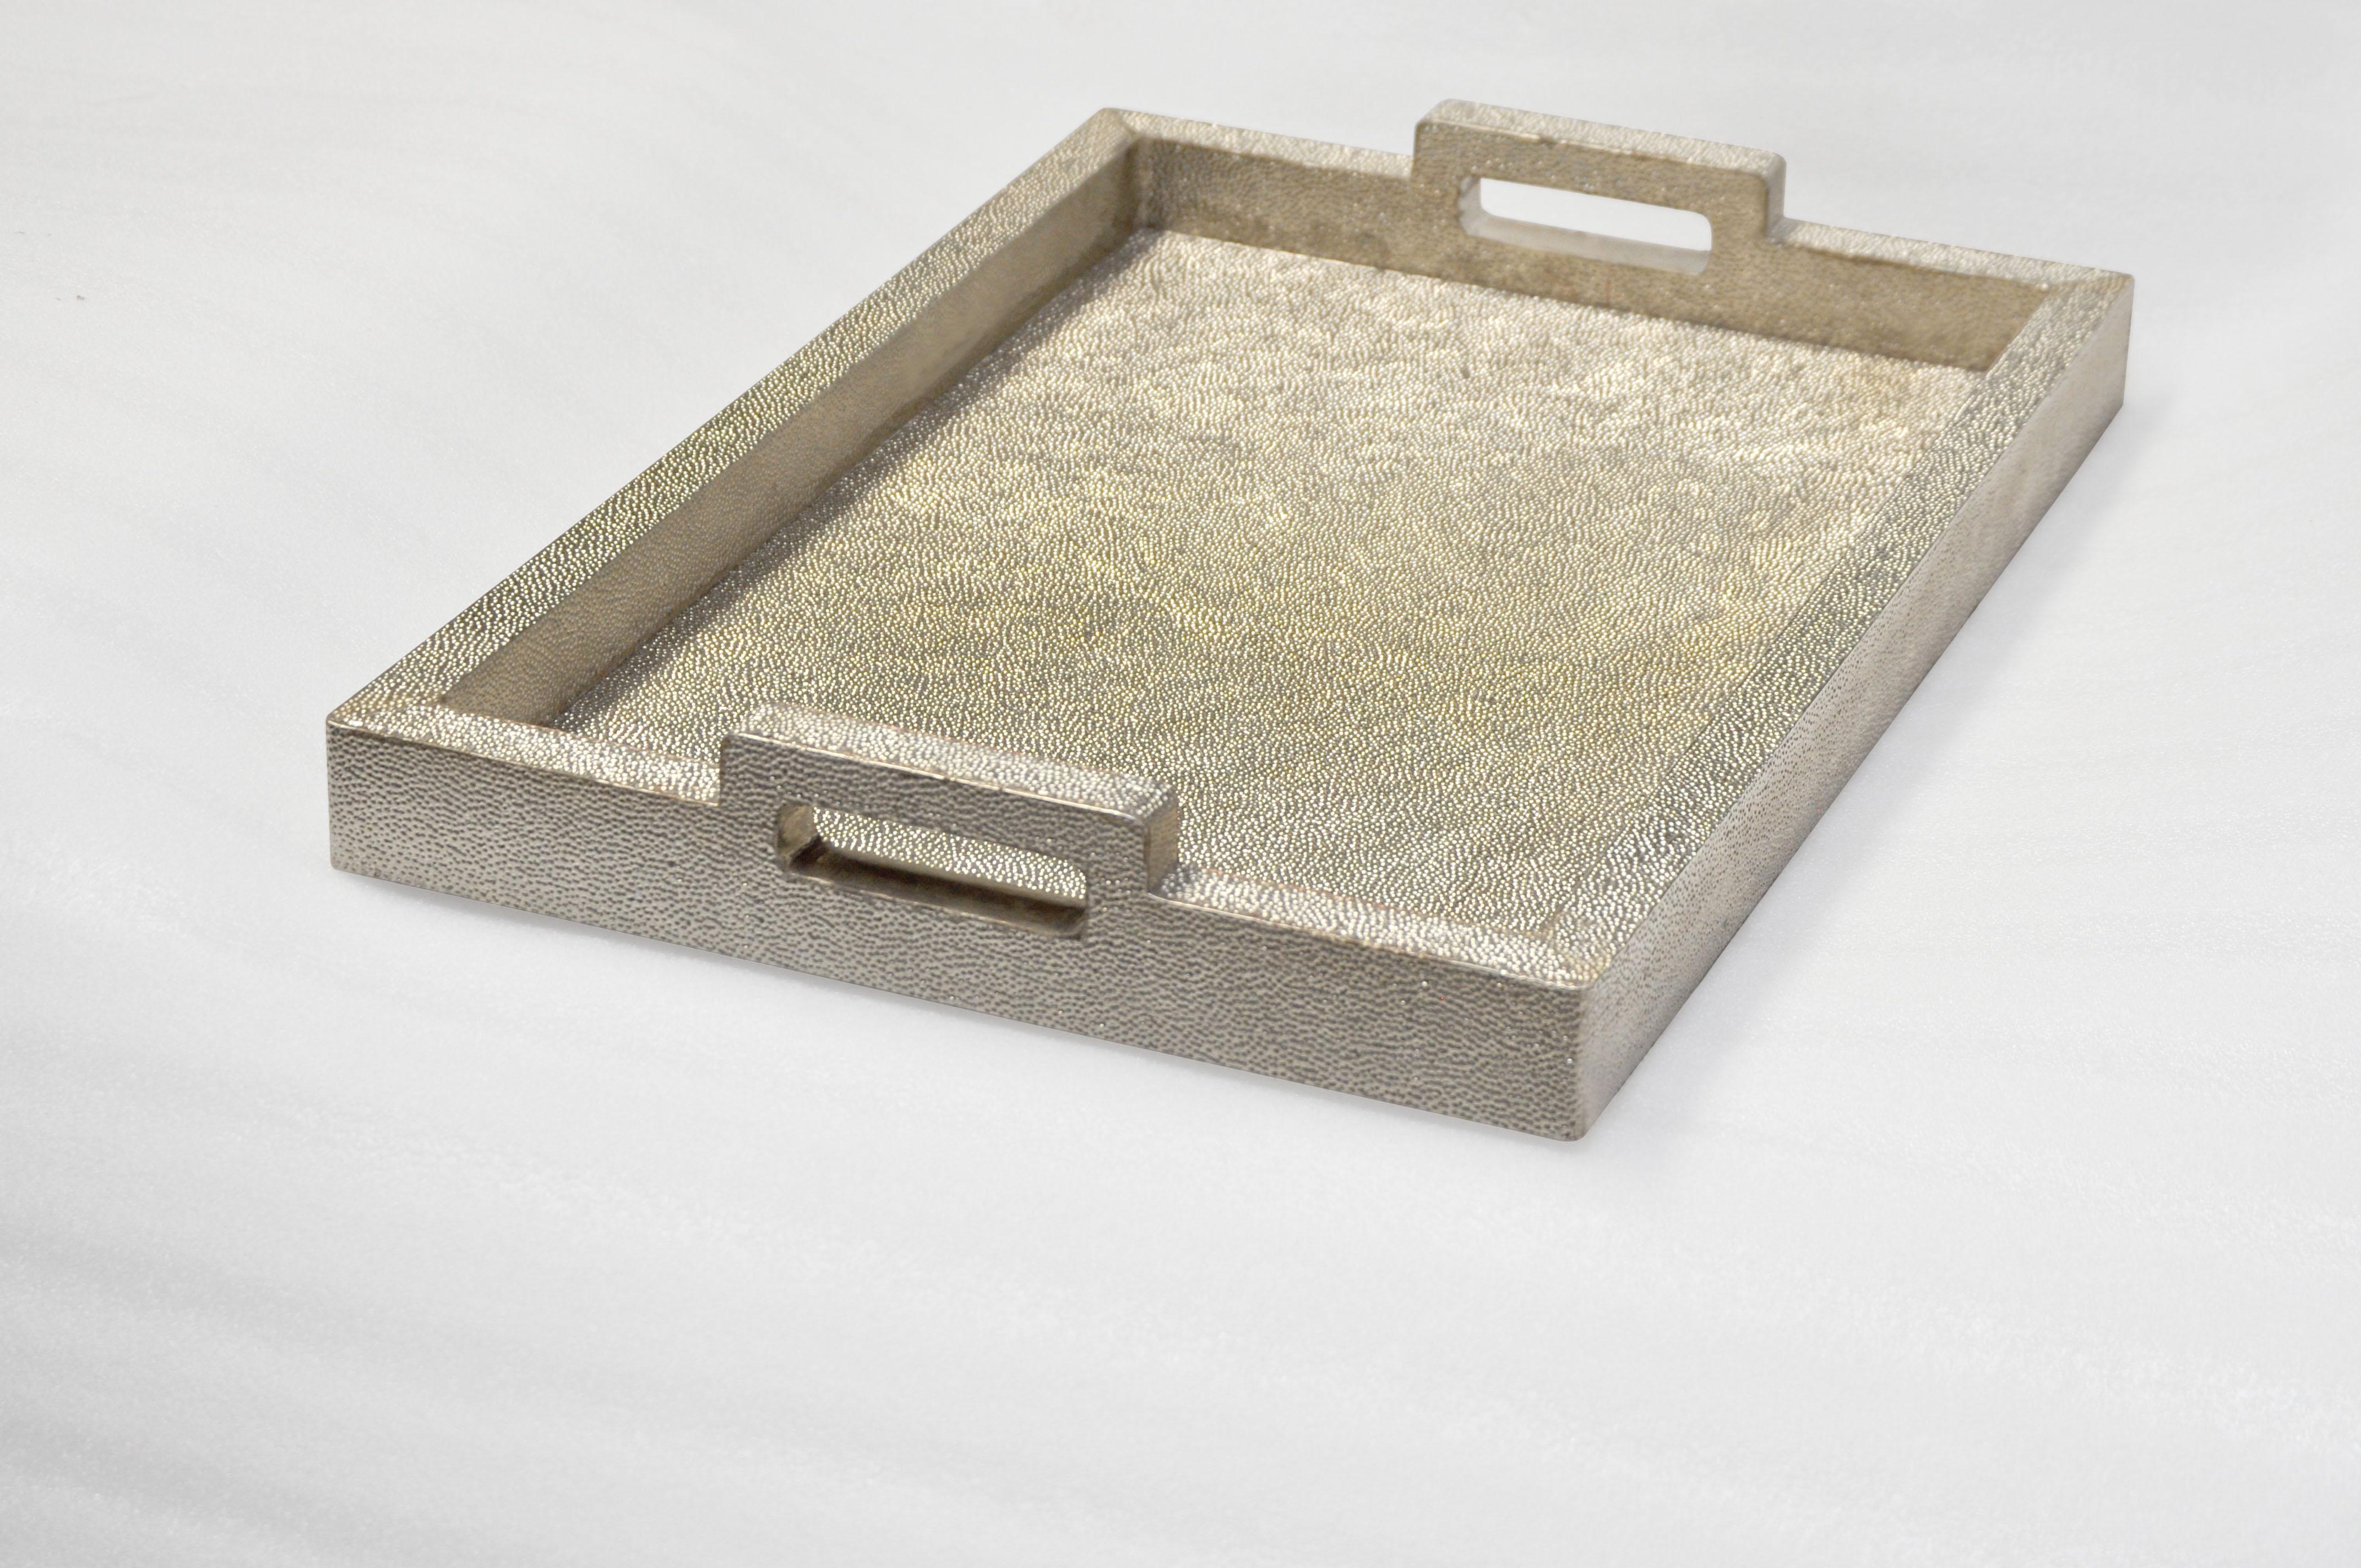 American Rectangular Metal Tray in White Bronze Clad Over MDF by Stephanie Odegard For Sale